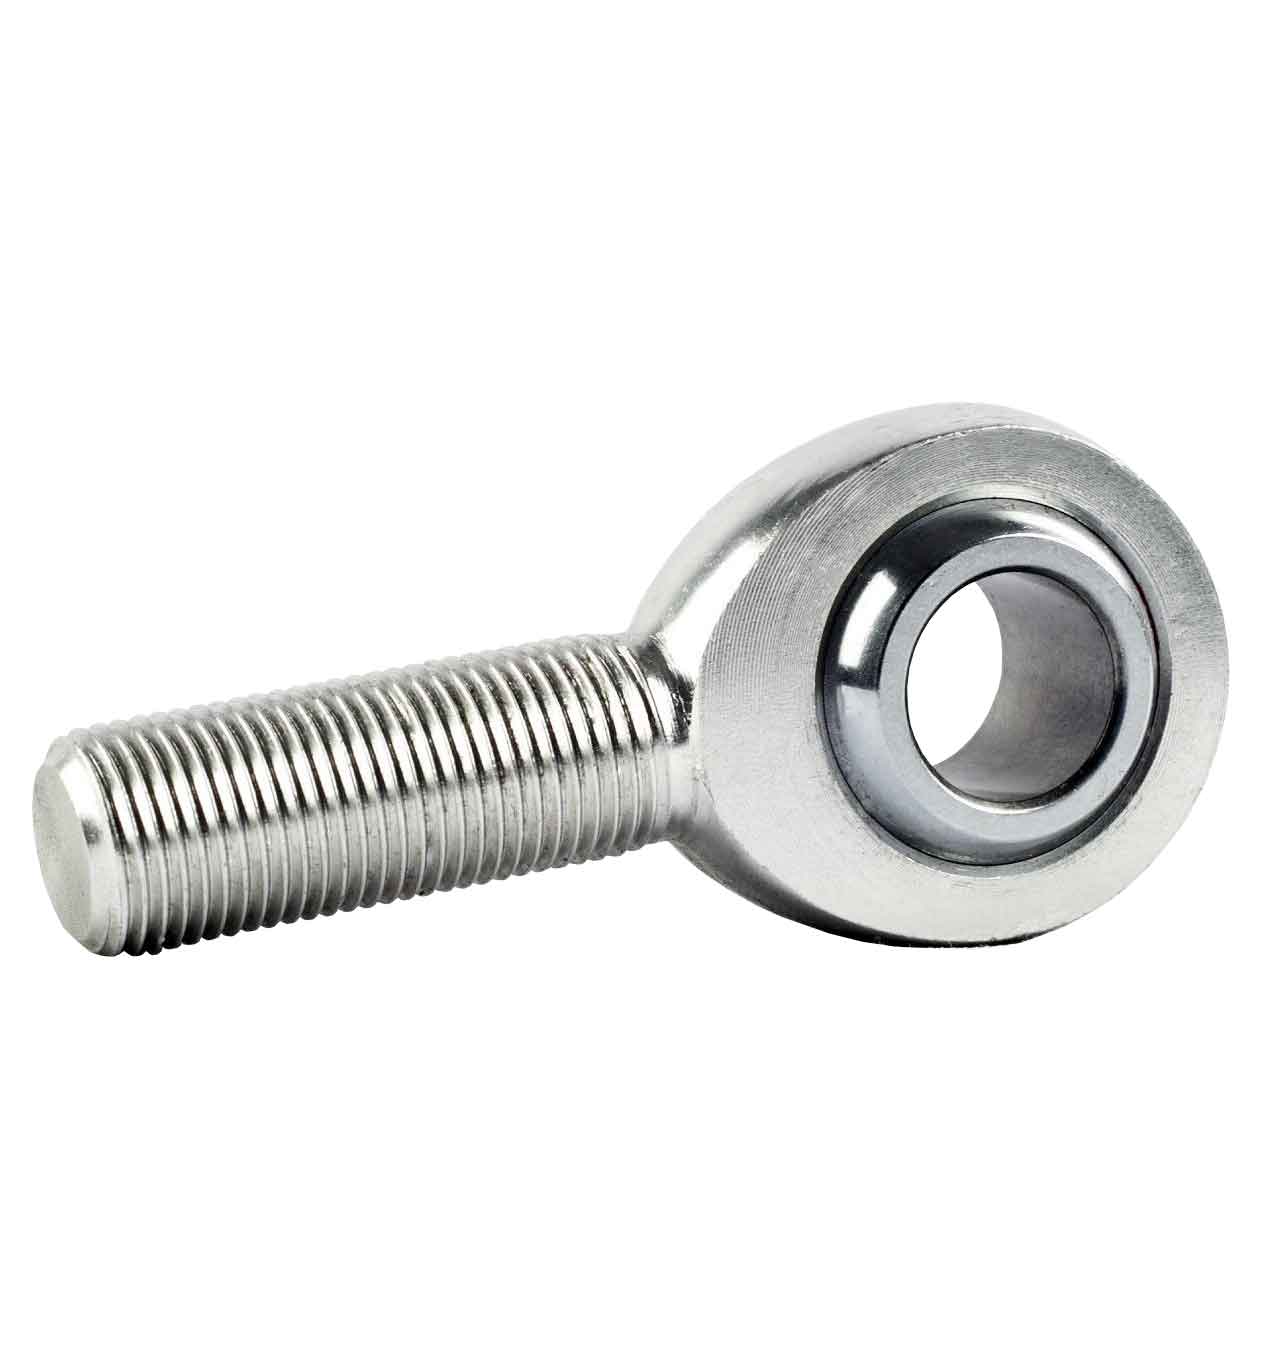 SS-POS5L GENERIC 5mm M5X0.8 STAINLESS STEEL MALE ROD END BEARING WITH LEFT HAND THREAD Thumbnail